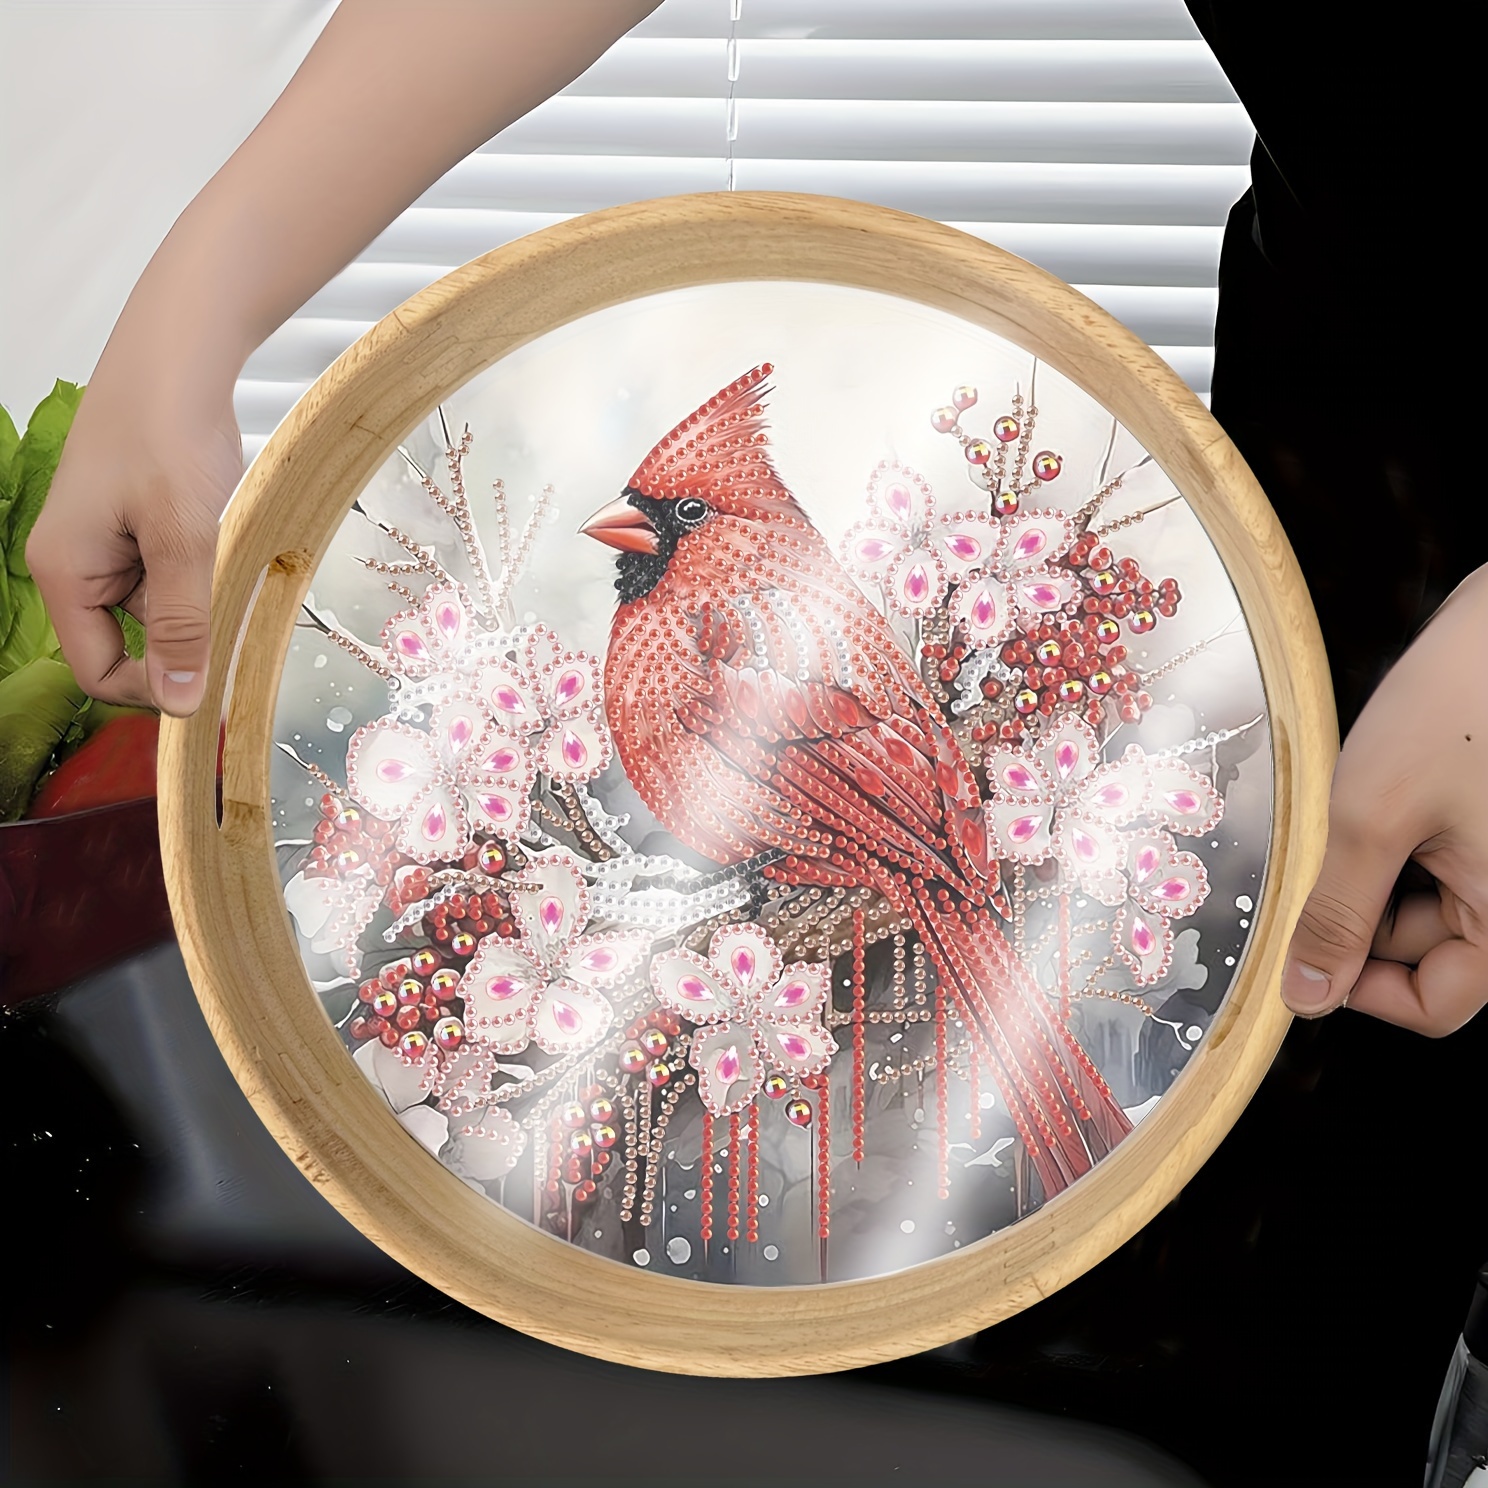 

Wooden Tray Diy Diamond Art Painting Kit With Handle - Animal-themed Bird Design, Irregular Shaped Crystals, Decorative Serving Platter For Dinner, Tea, Breakfast - Party & Home Decor (2 Sizes)